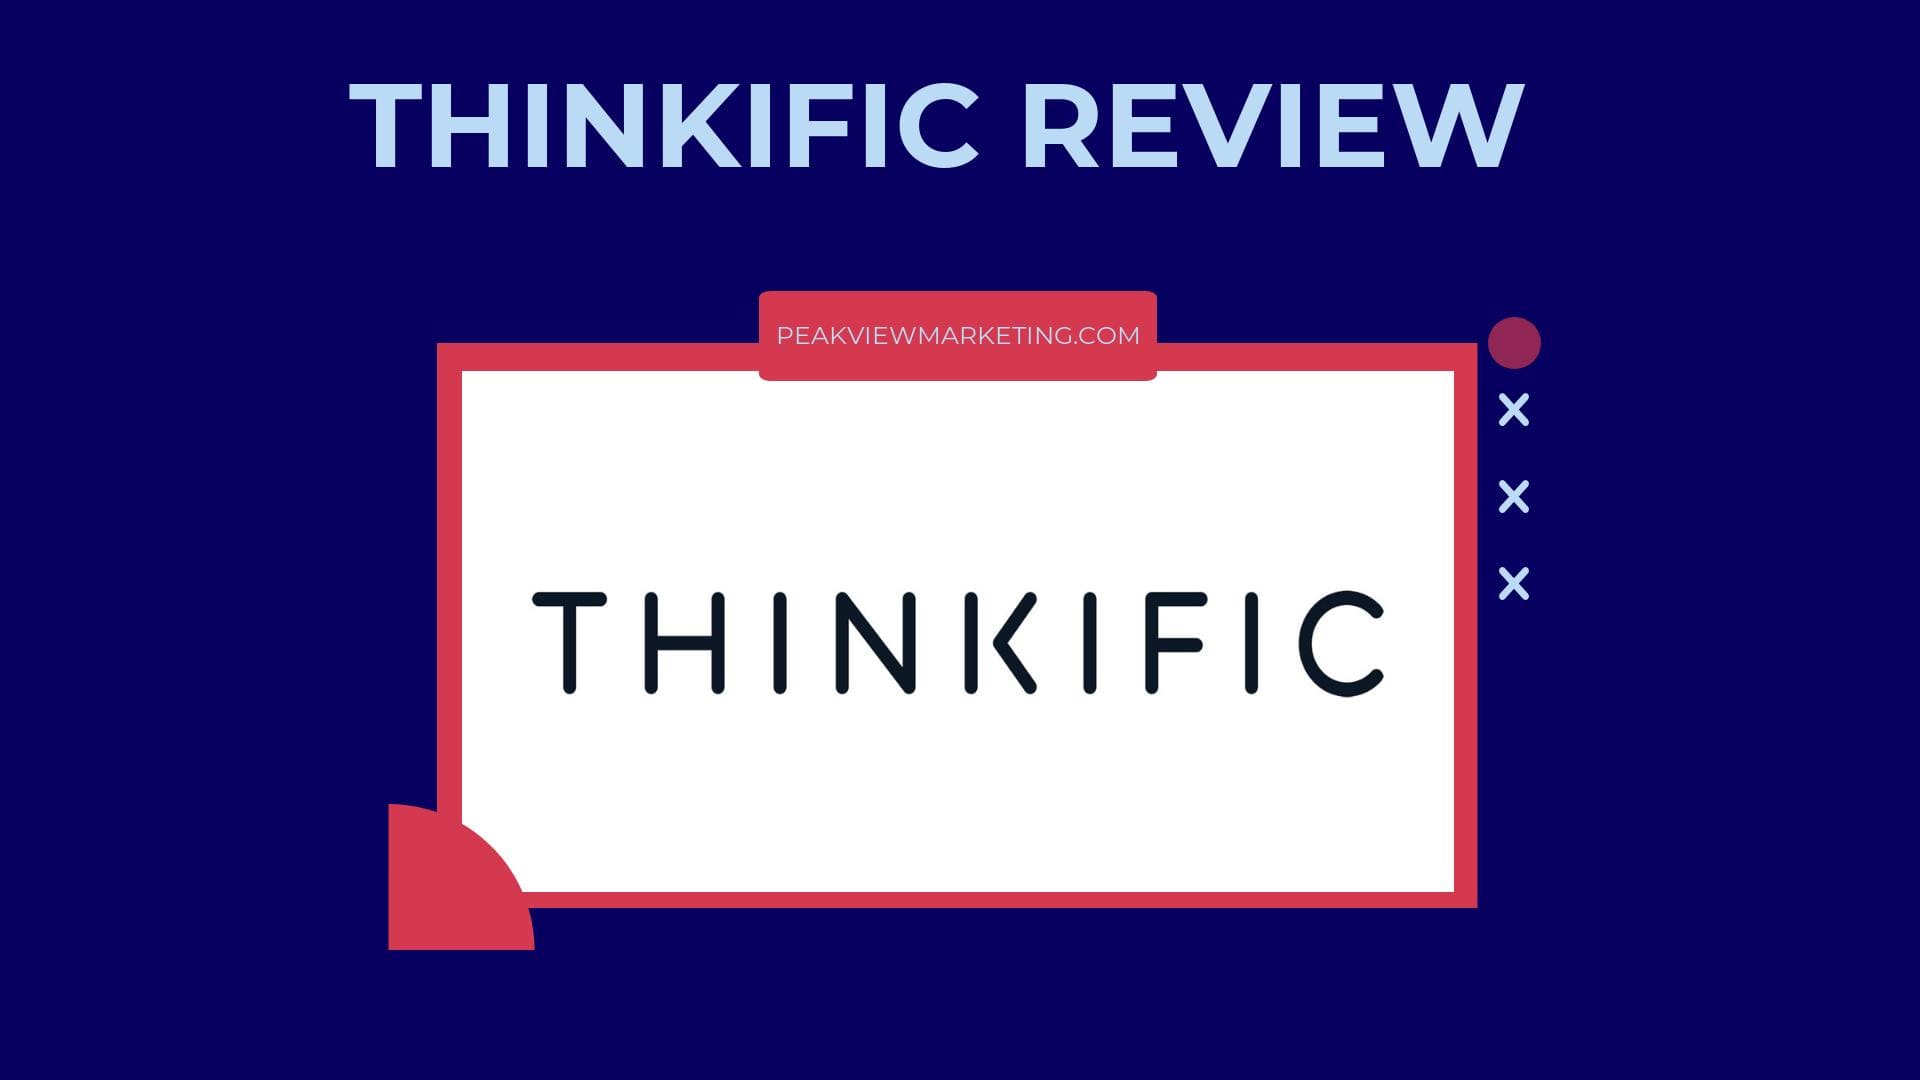 Thinkific Review Image